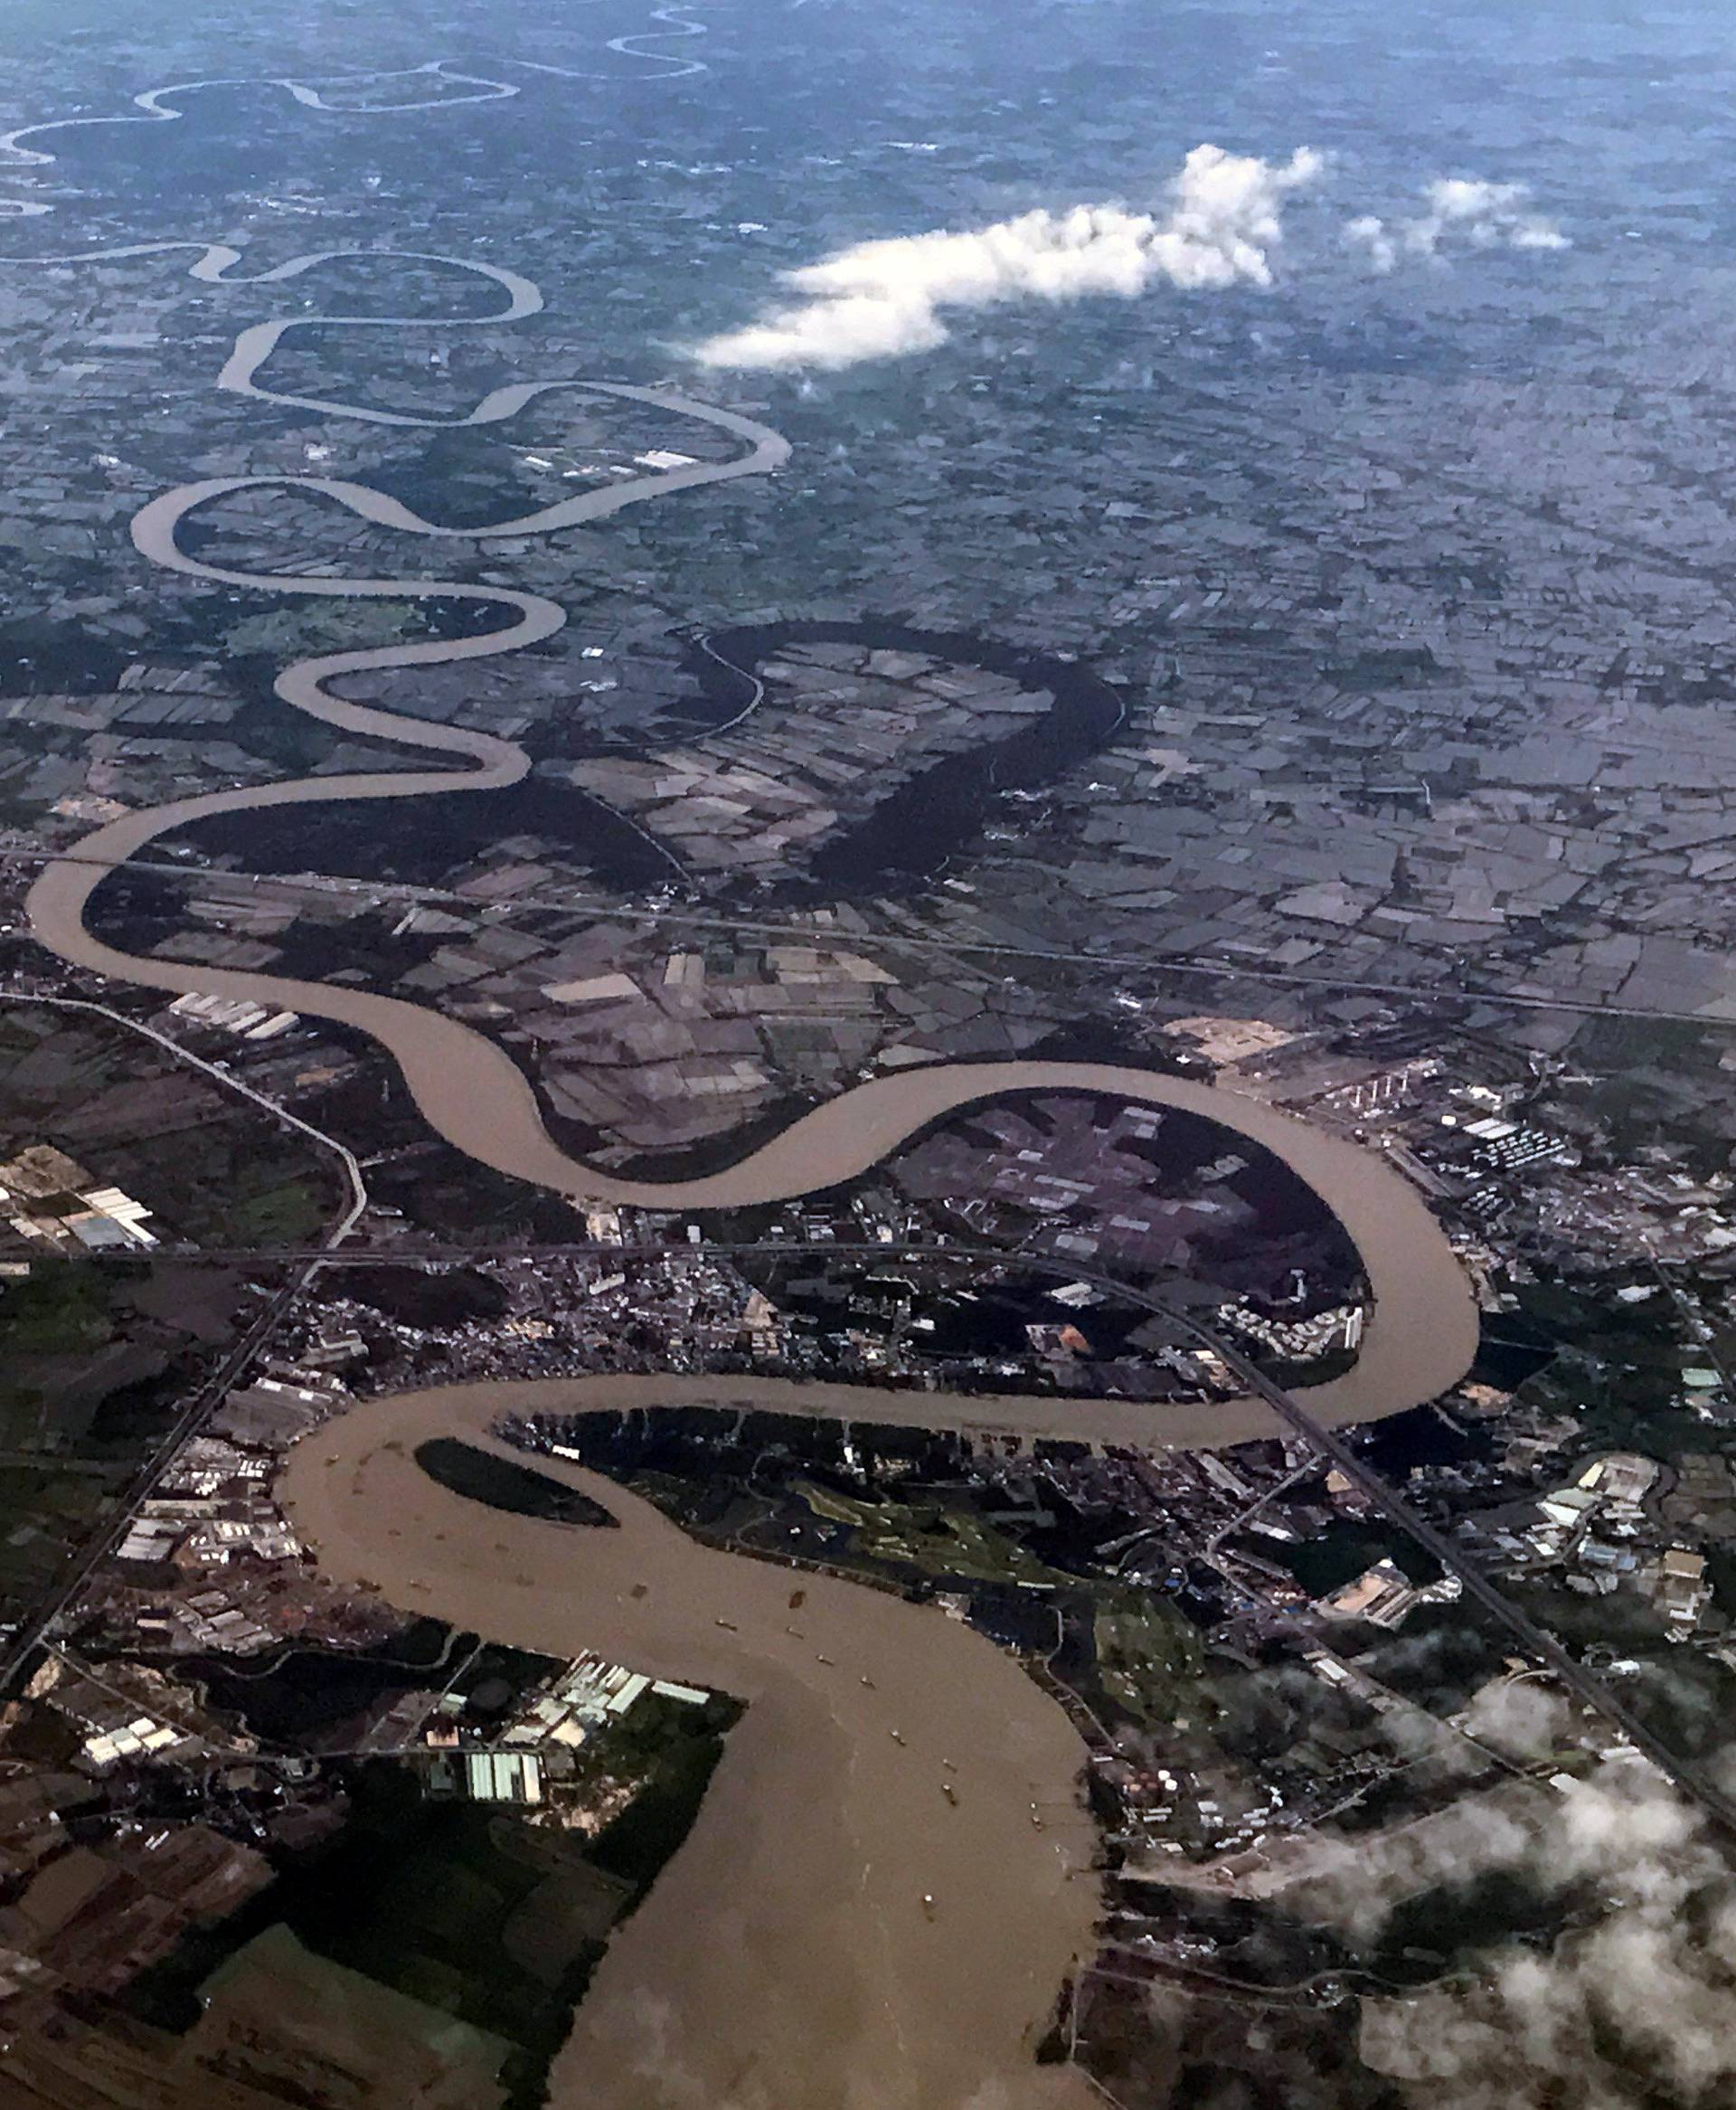 The Chao Phraya river is seen from a landing airplane in Bangkok